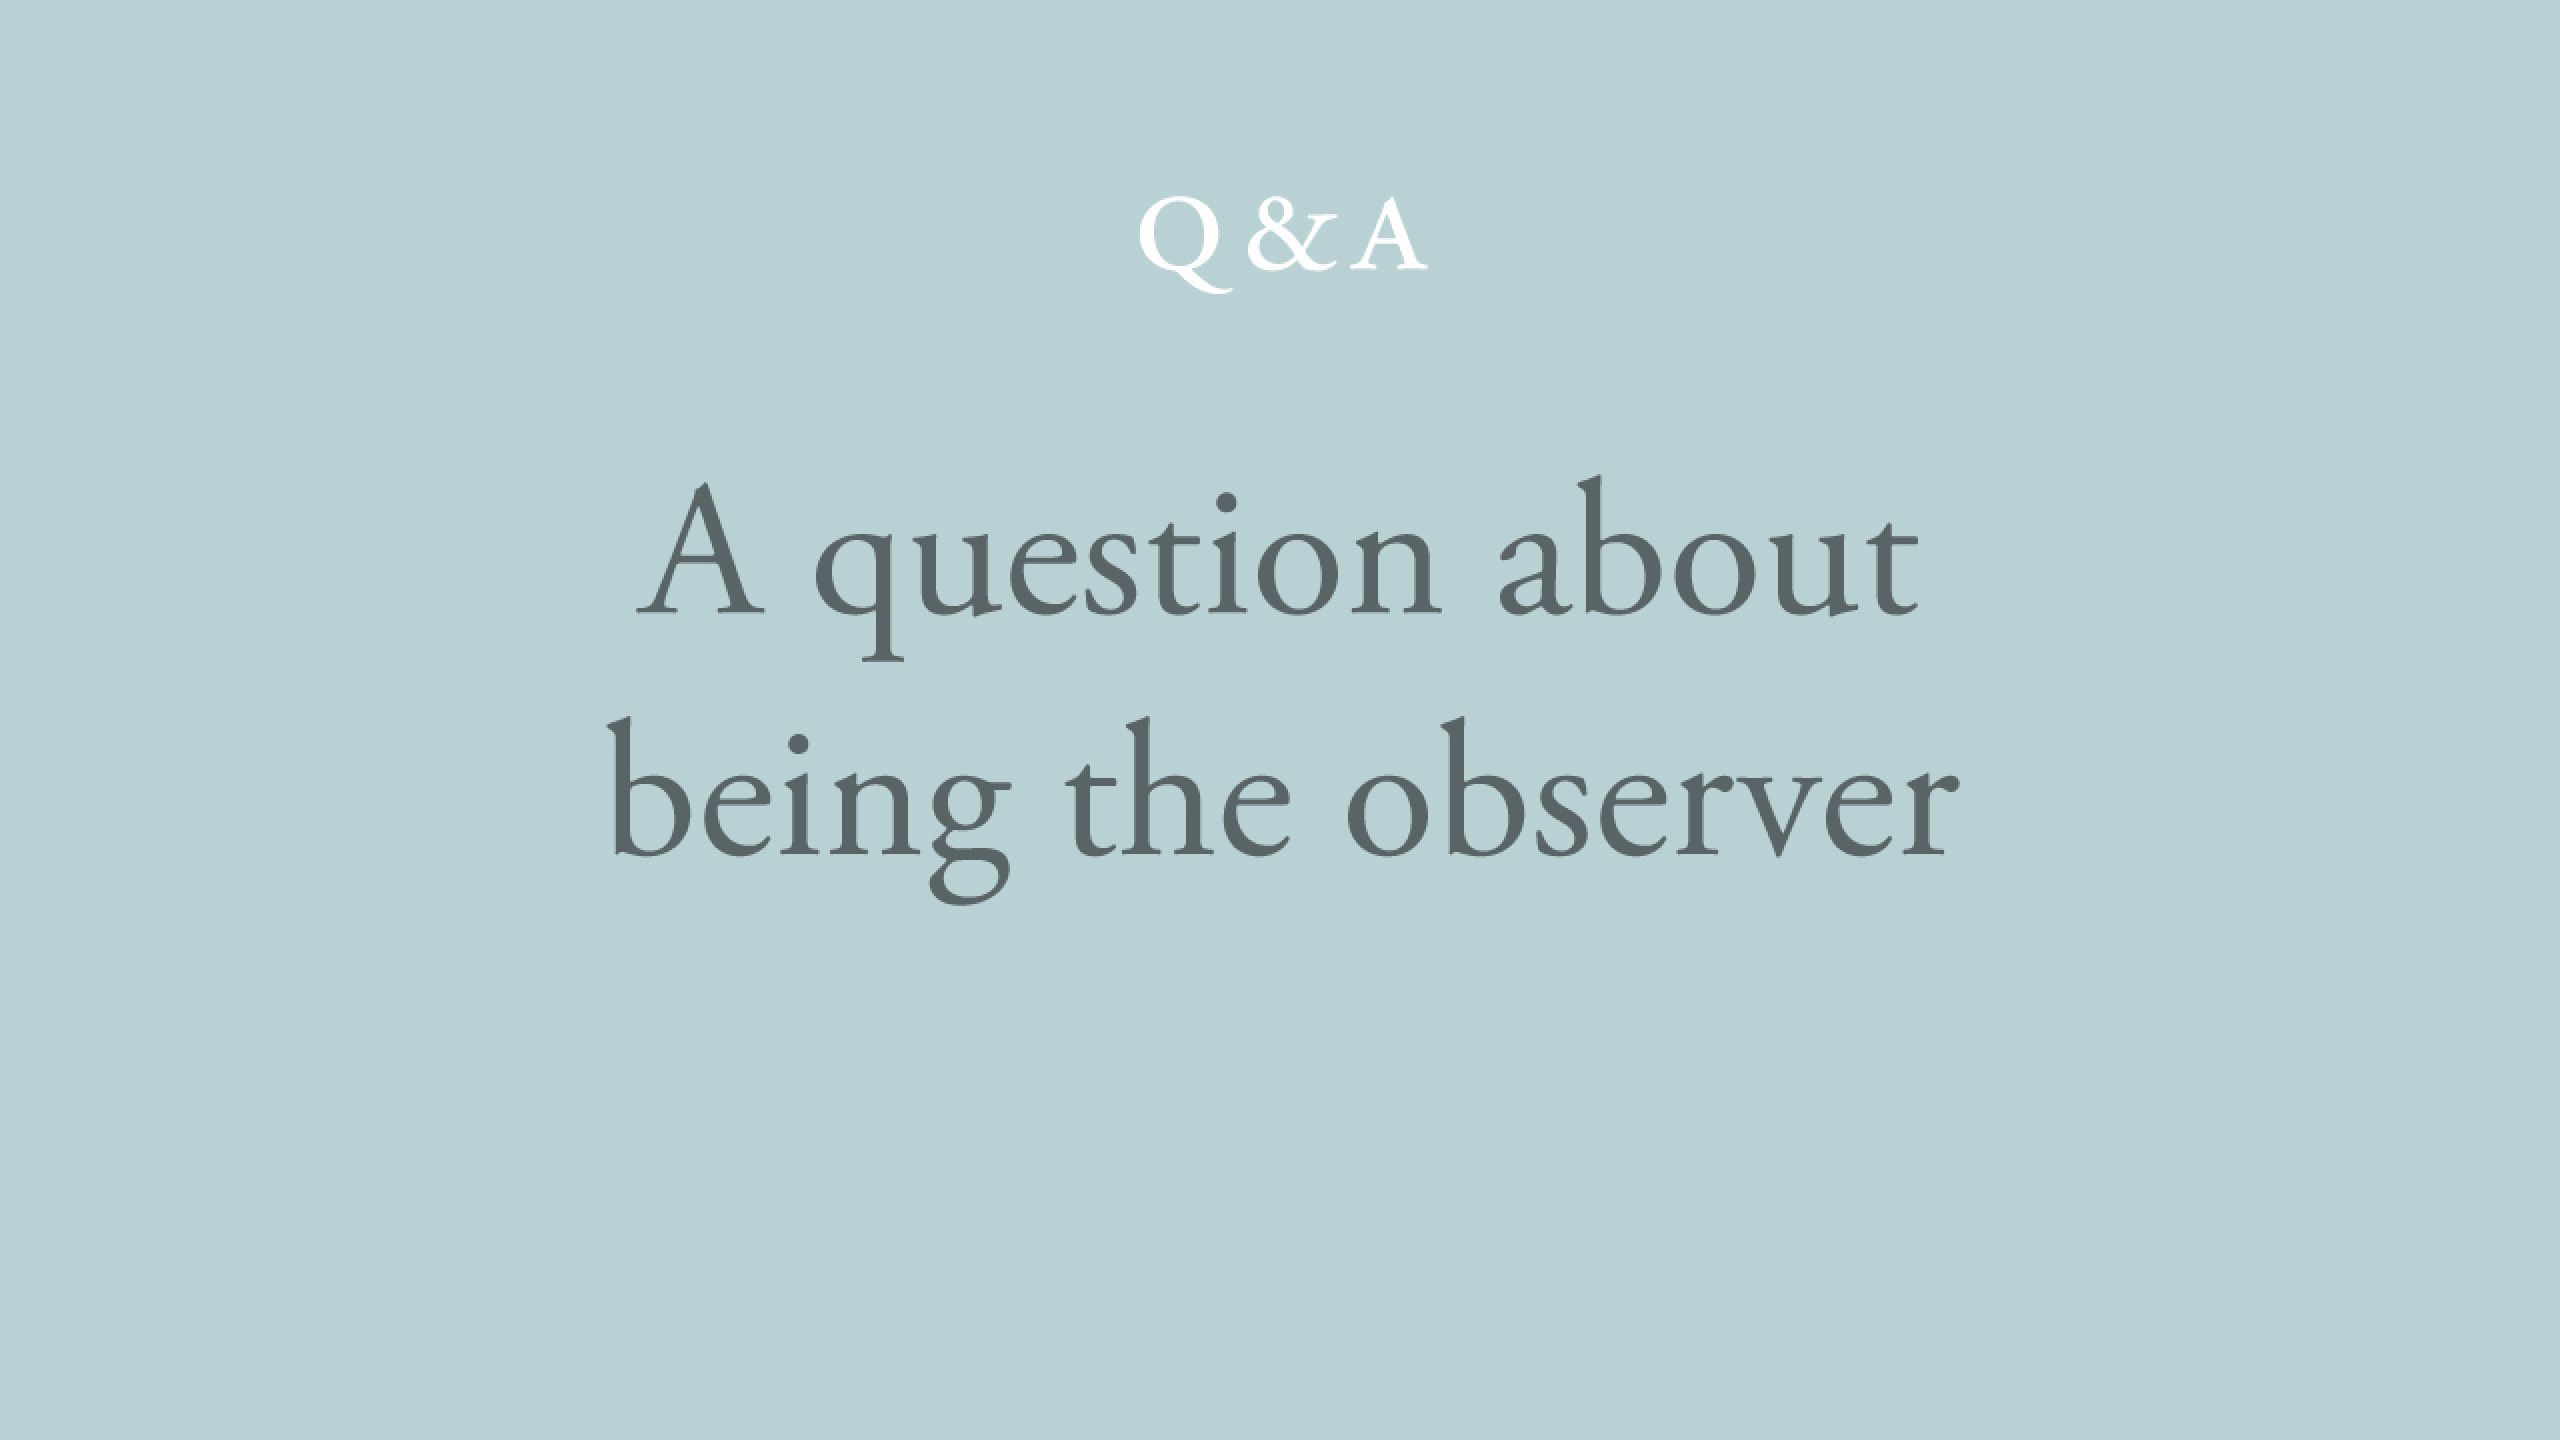 Is being the observer the aim?